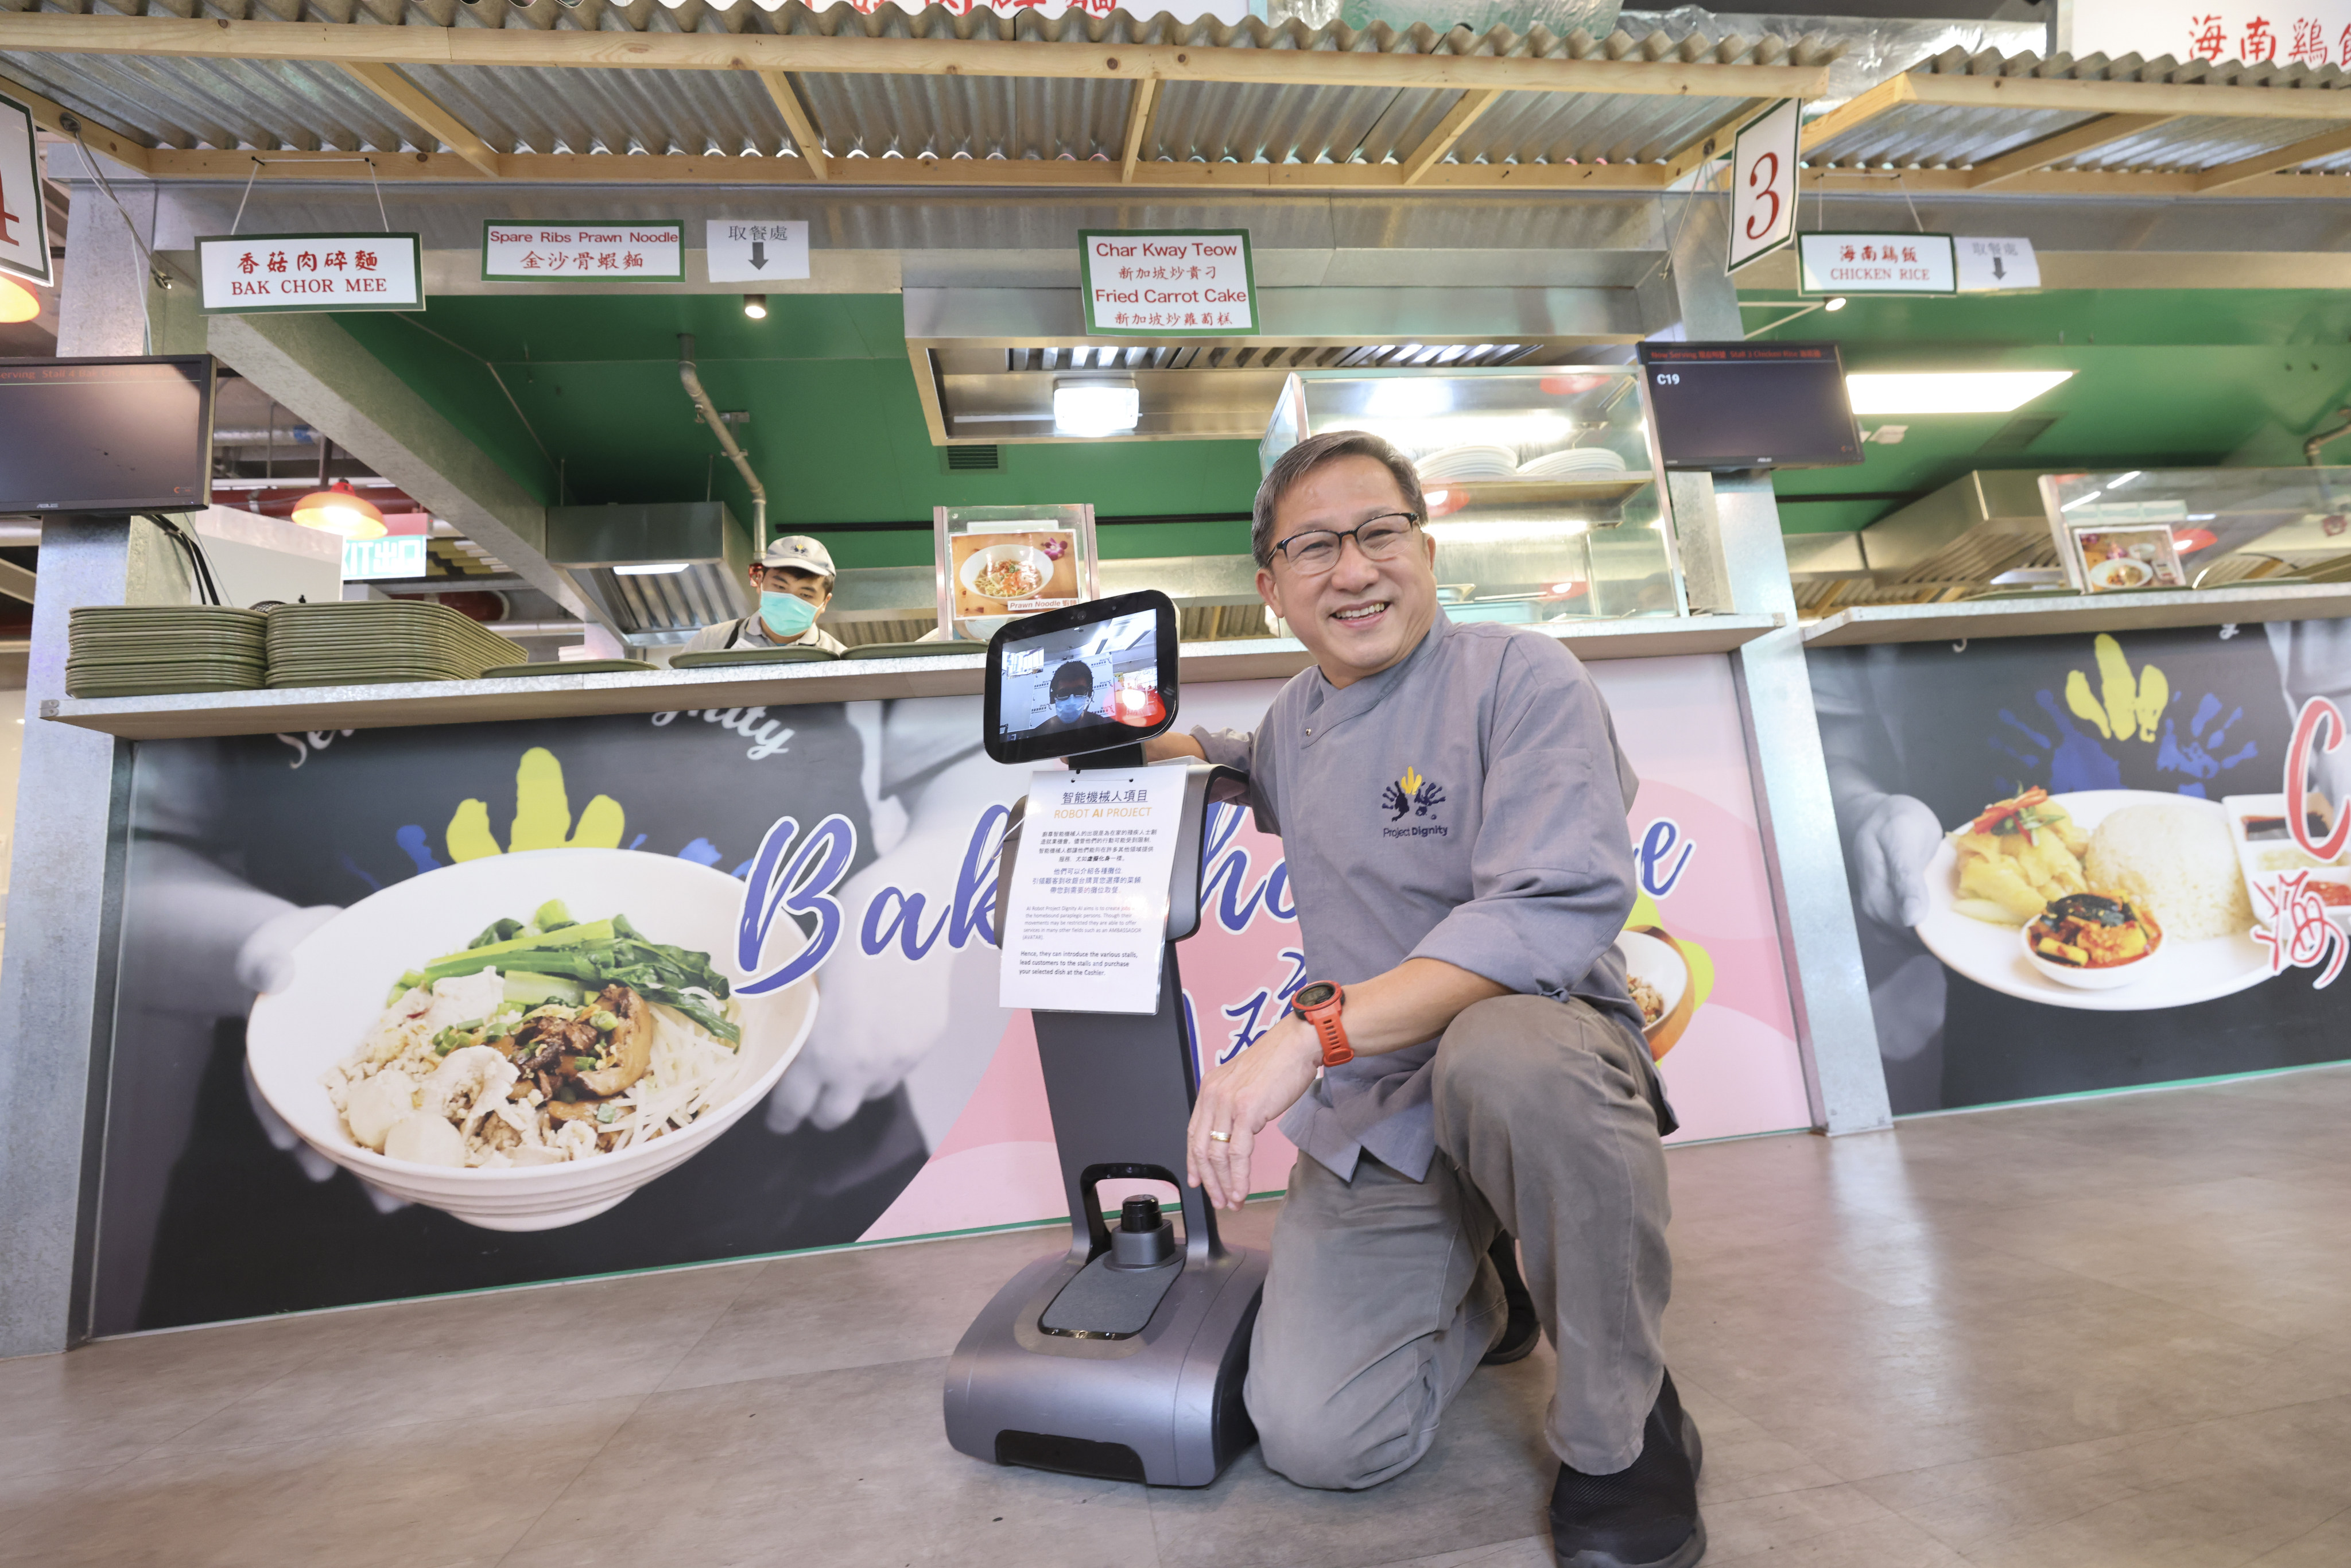 Dignity Kitchen founder Koh Seng Choon (right) with paraplegic Eddie Lau (on the tablet screen) who operates Temi, the robot, remotely. Photo: May Tse